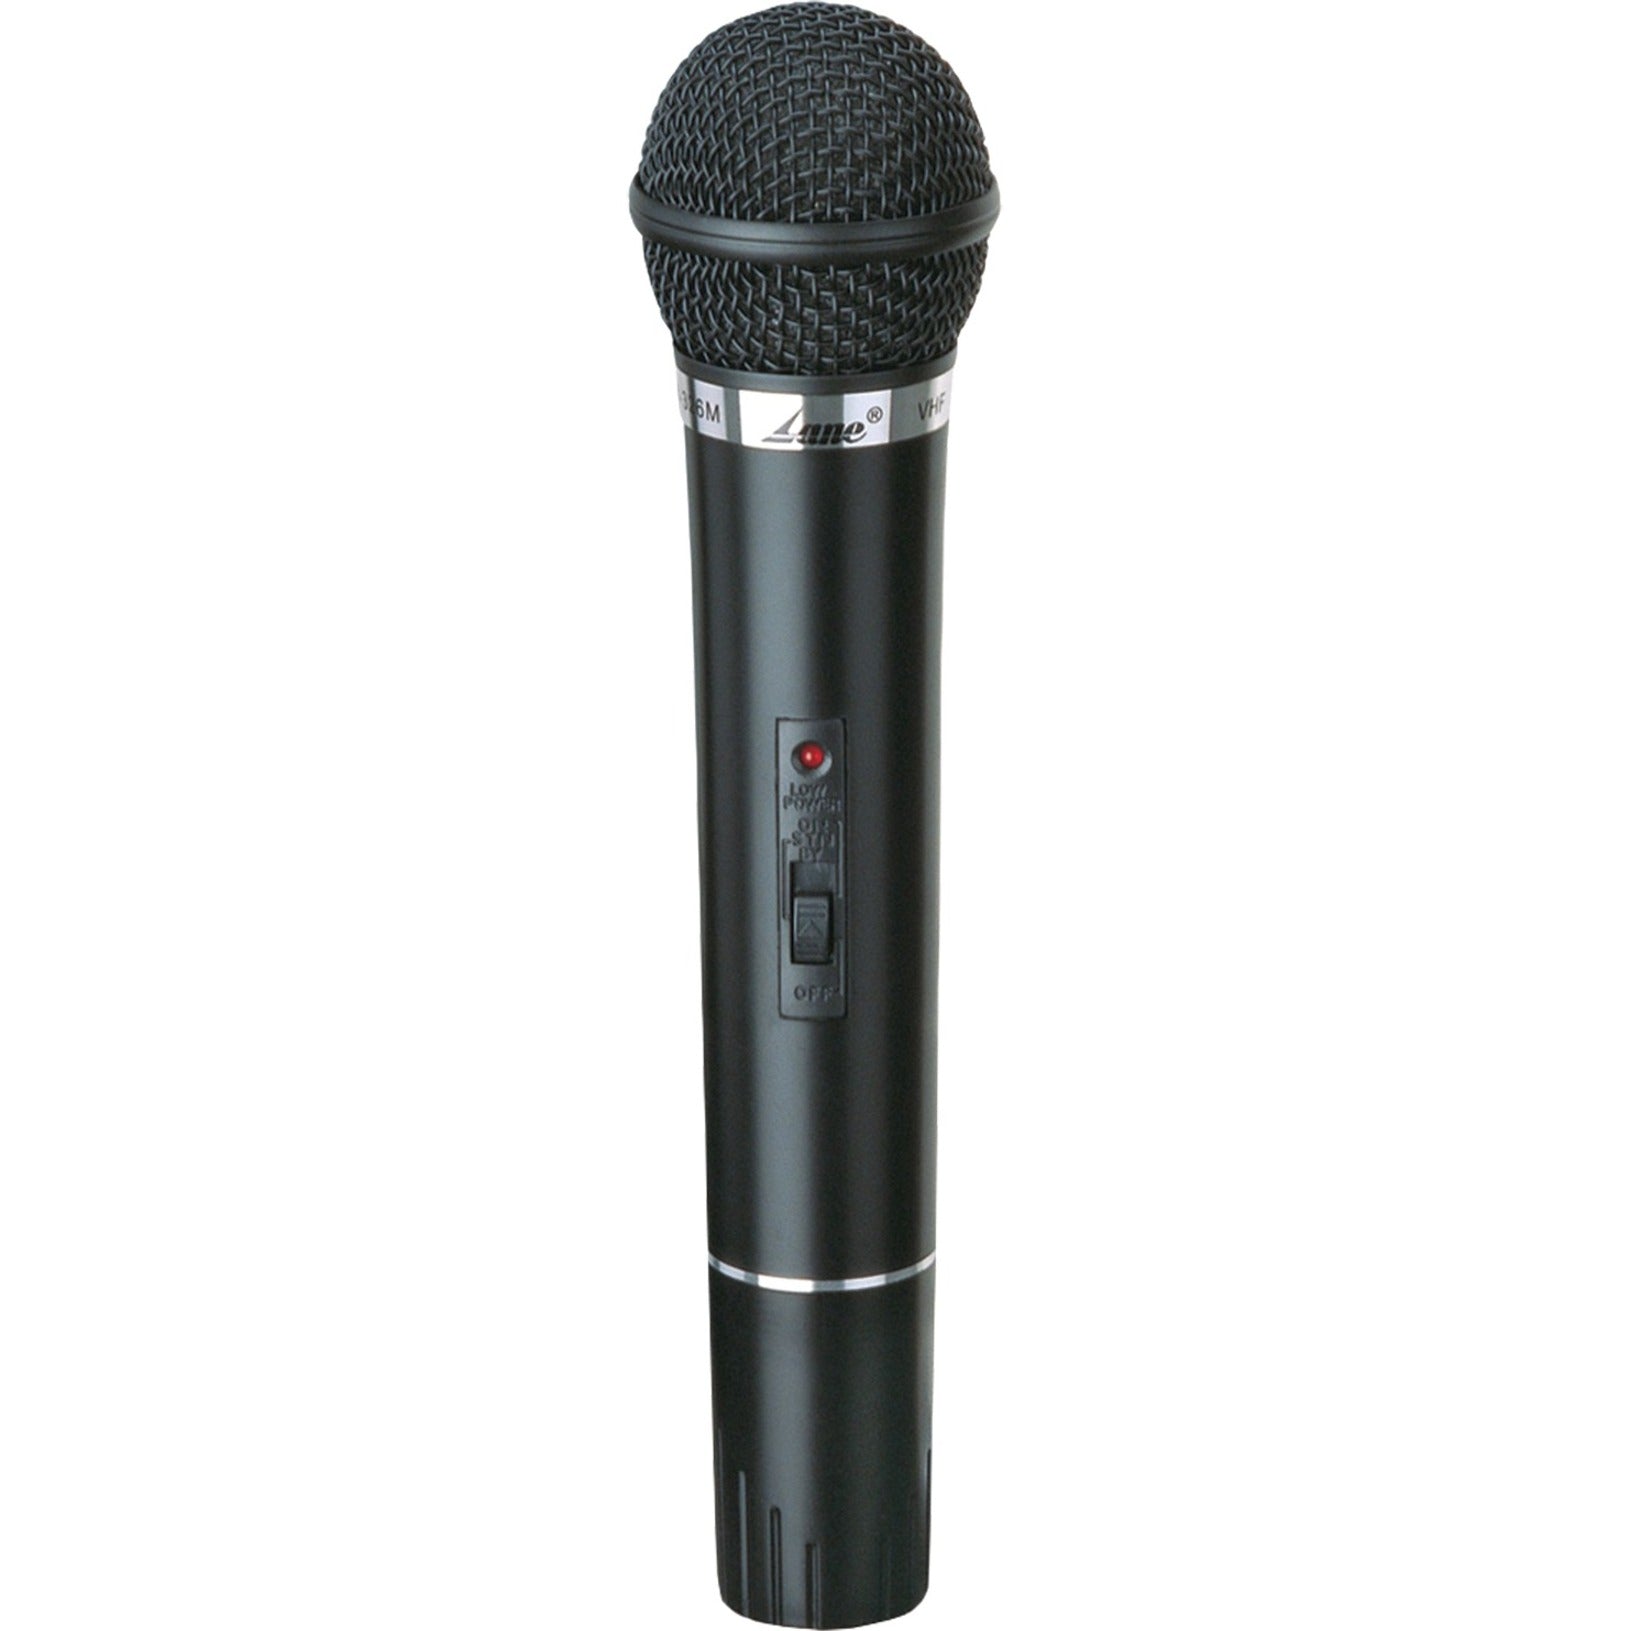 Blackmore BMP-50 Wireless Microphone System, 164.04 ft Operating Range, Dynamic Microphone Technology